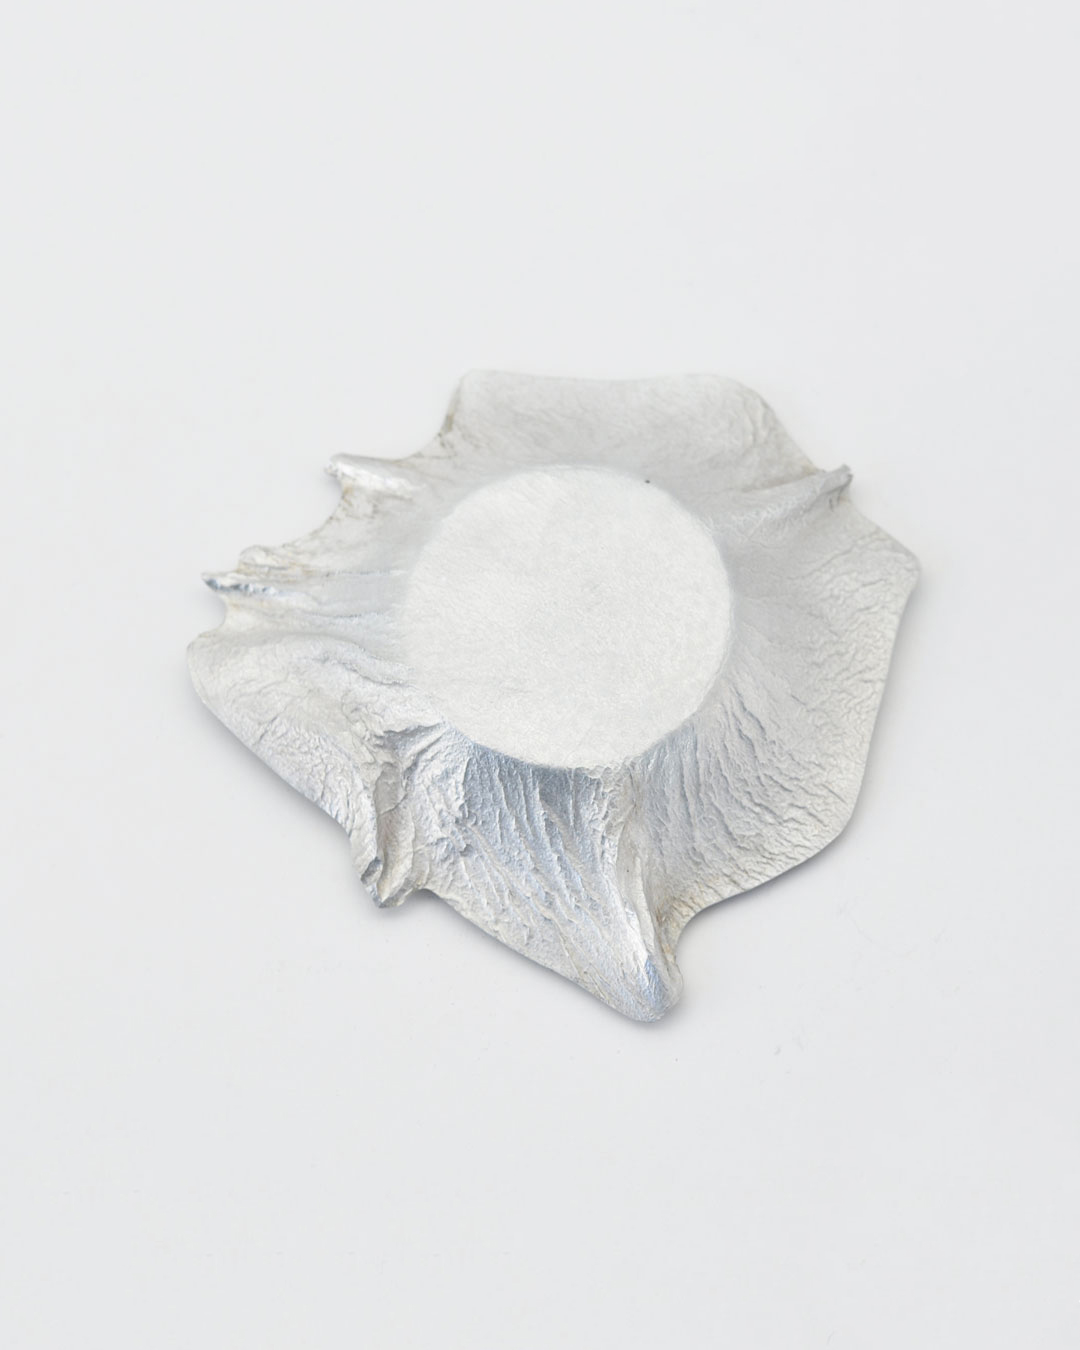 Anders Ljungberg, Intension Large #1, 2019, broche; aluminium, staal, 112 x 114 x 20 mm, €550